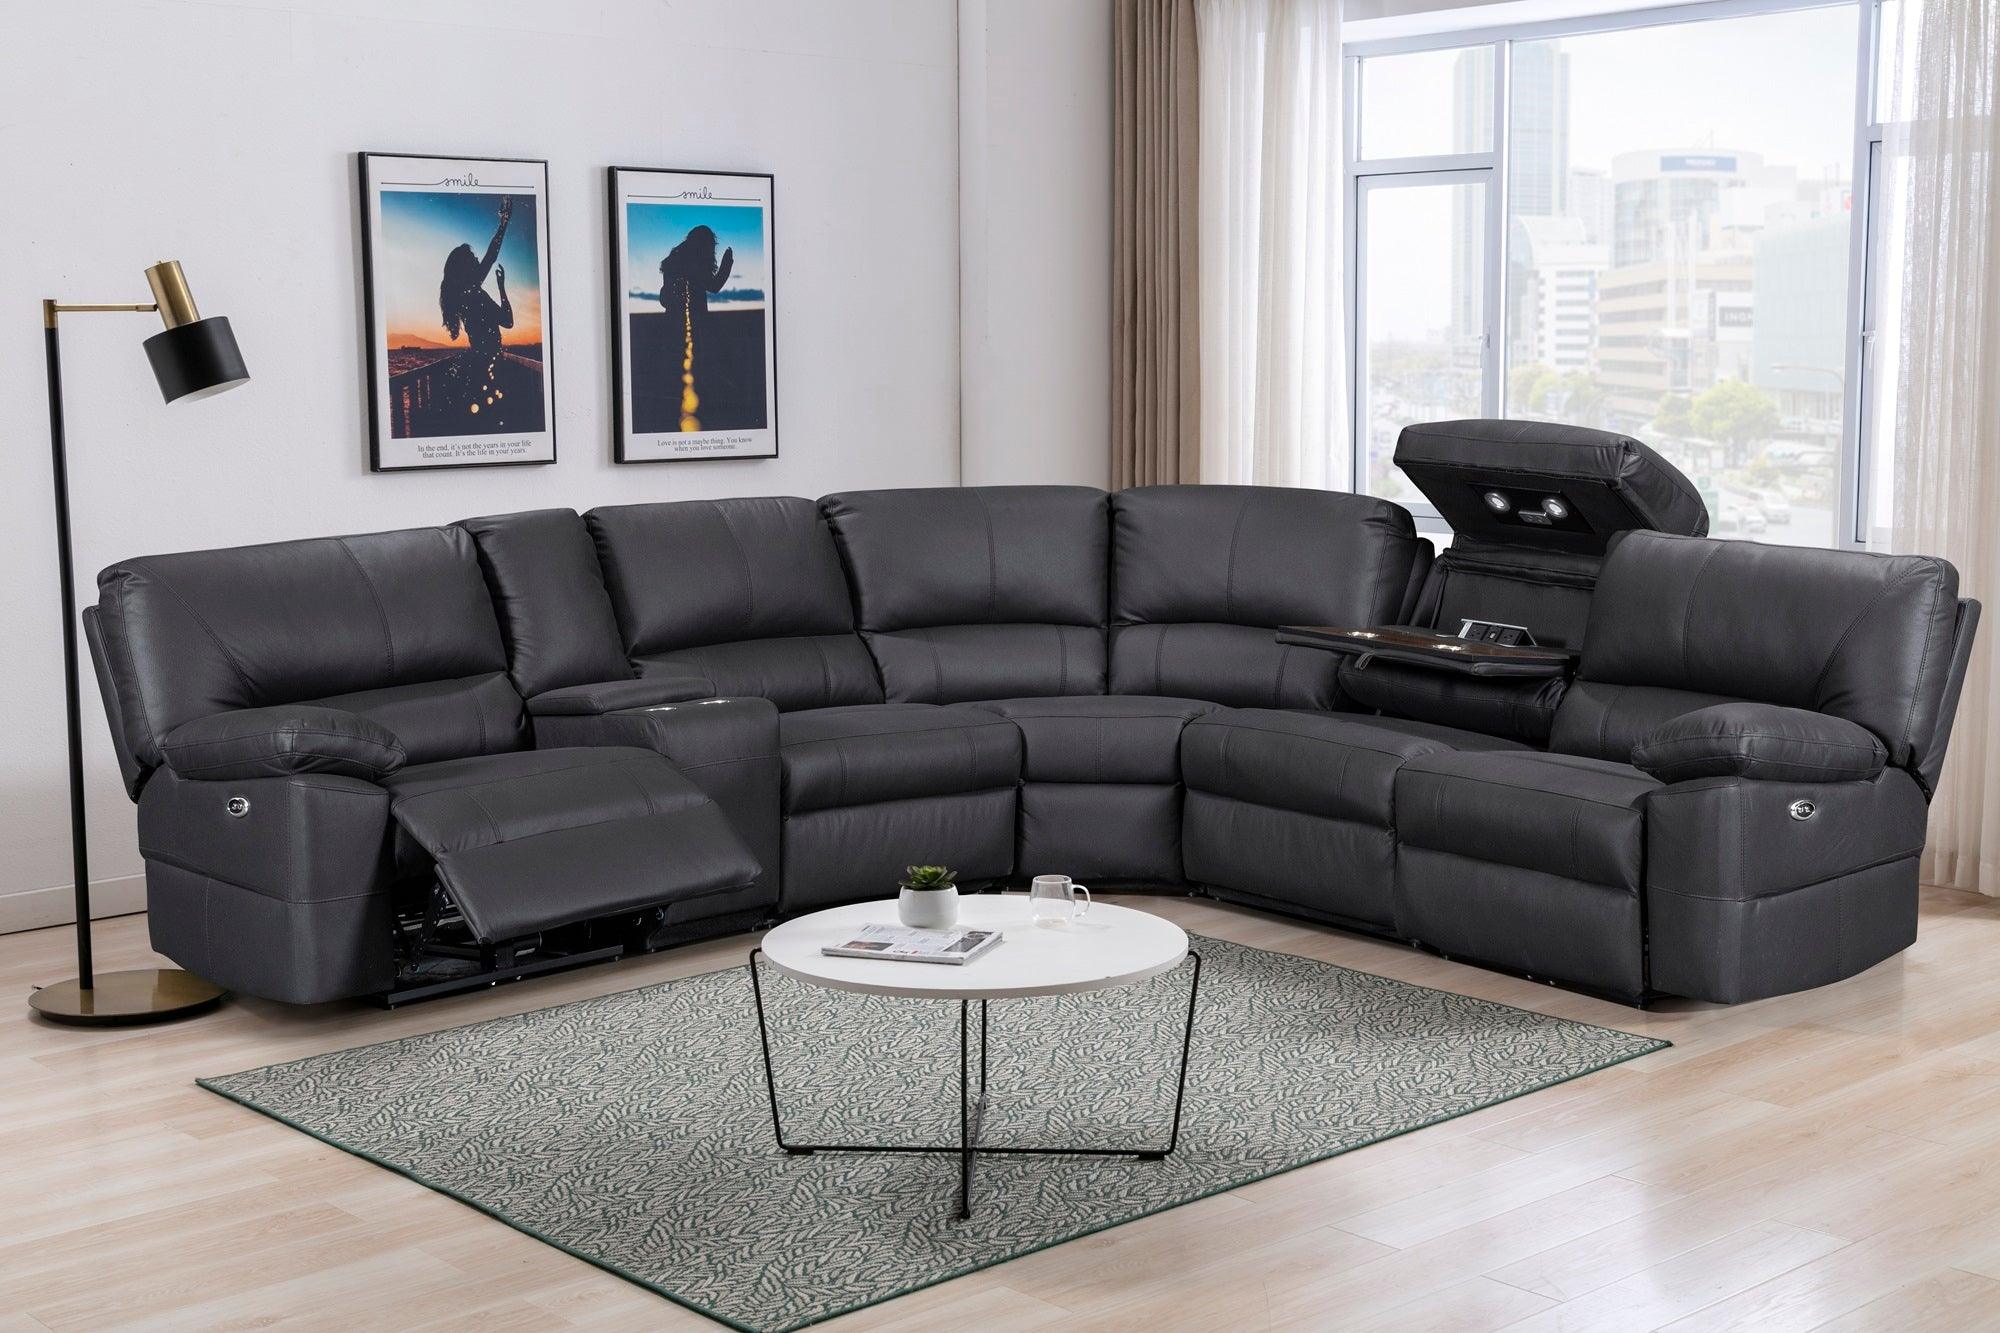 Corner Recliner Sofas: Comfort & Style for Your Living Room